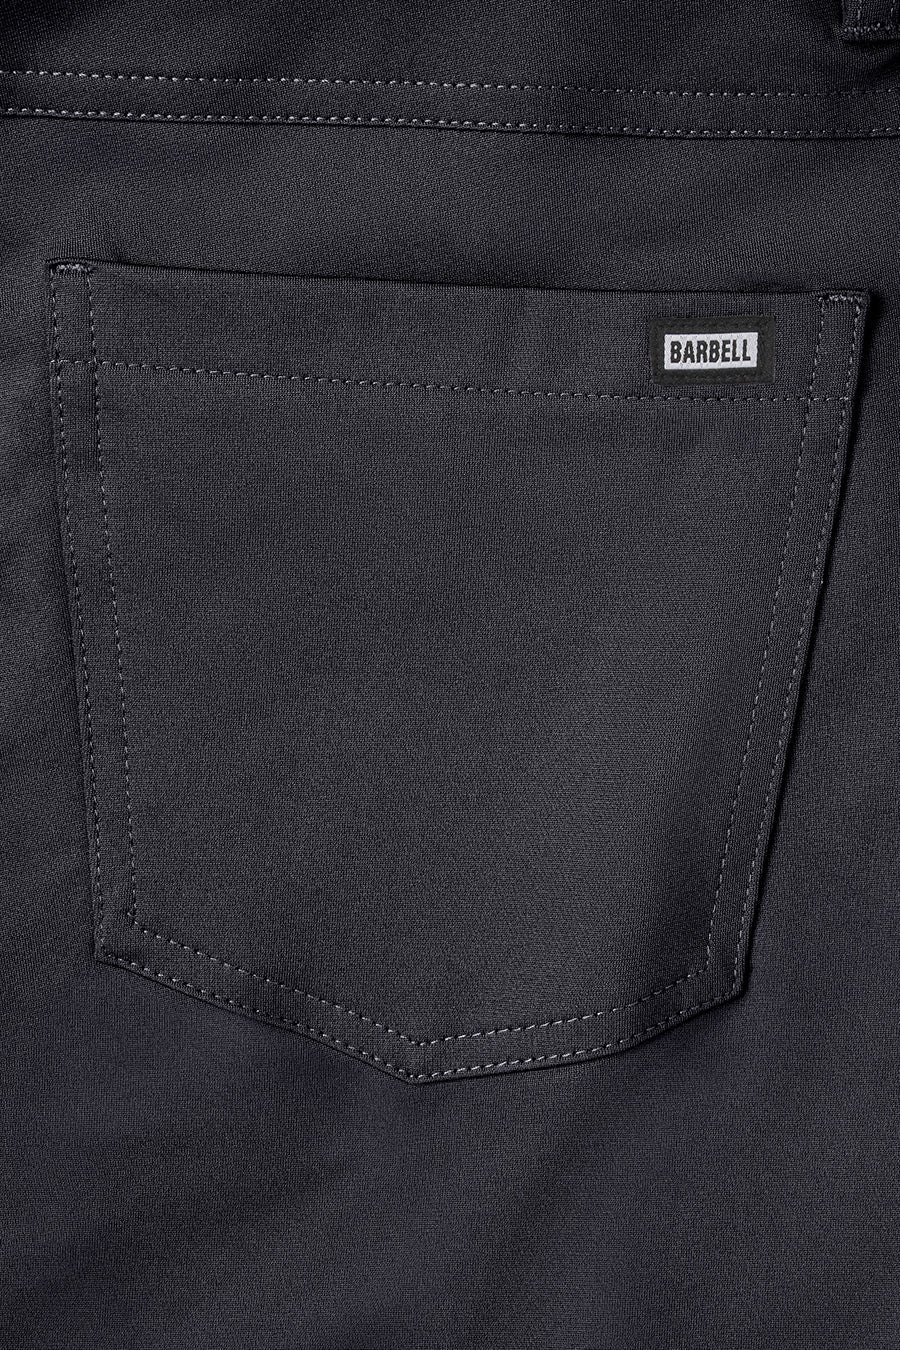 Anything Pant Straight - Navy - photo from back pocket detail #color_navy